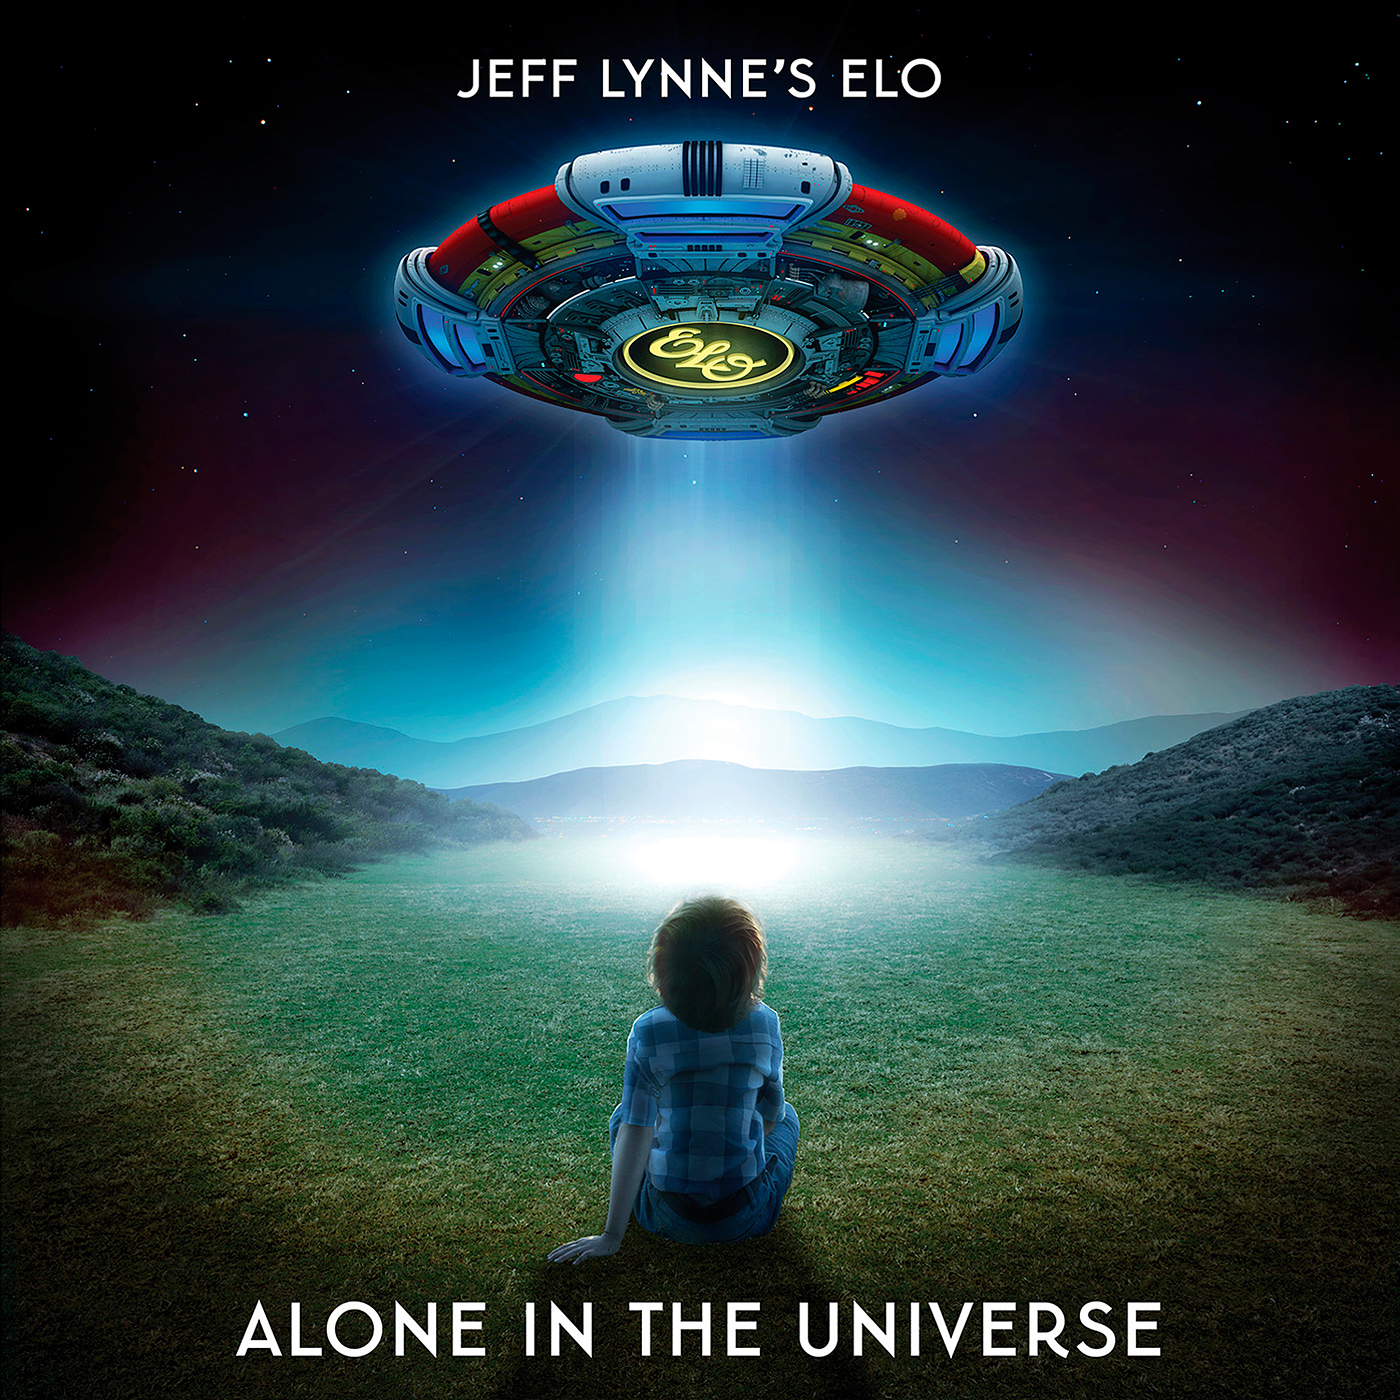 Electric Light Orchestra – Alone In The Universe (2015) [Qobuz FLAC 24bit/96kHz]